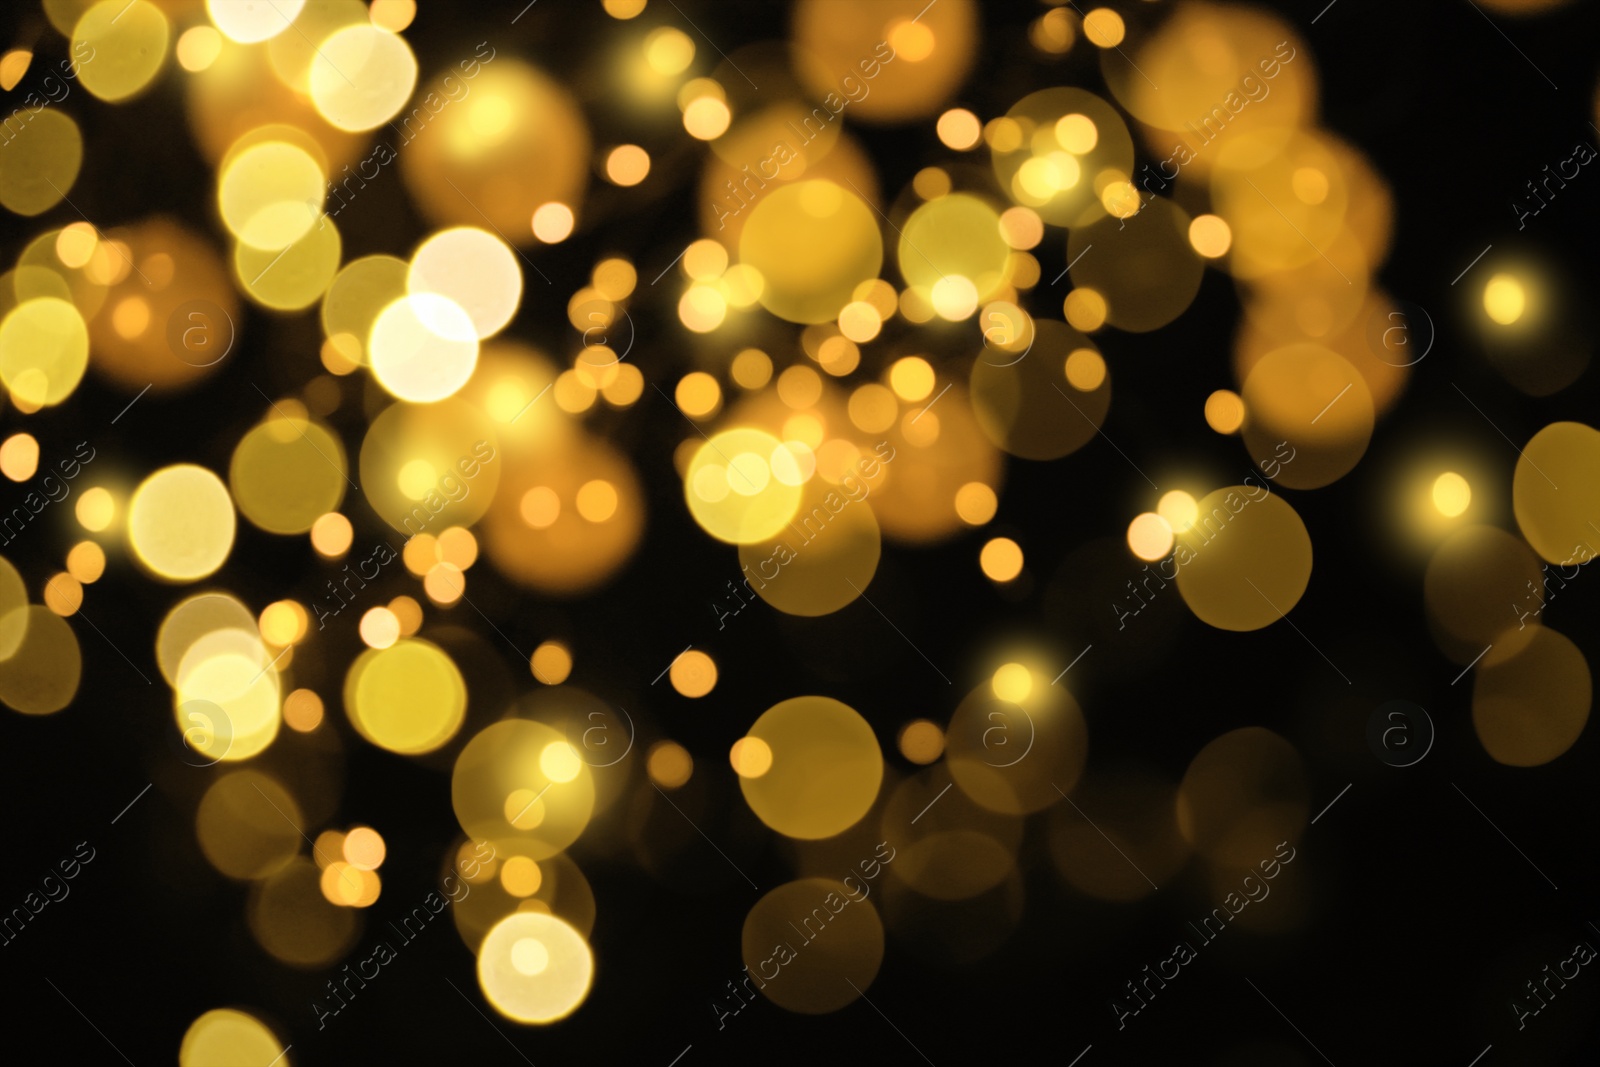 Image of Blurred view of gold lights on black background, bokeh effect